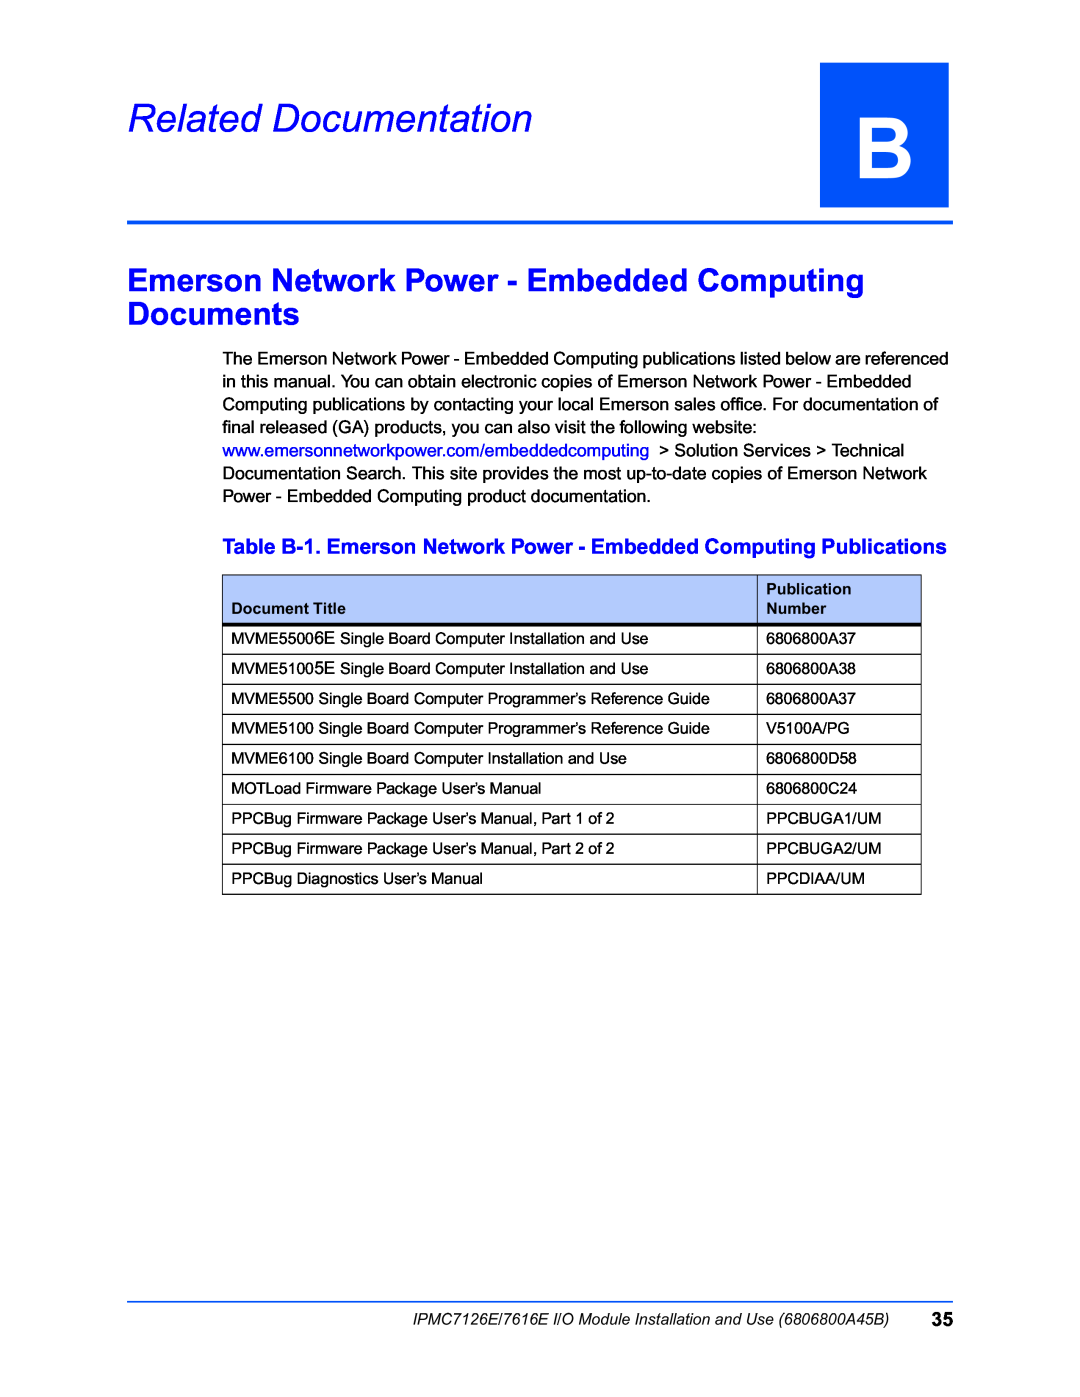 Emerson IPMC7126E Related Documentation, Emerson Network Power - Embedded Computing Documents, Publication, Document Title 